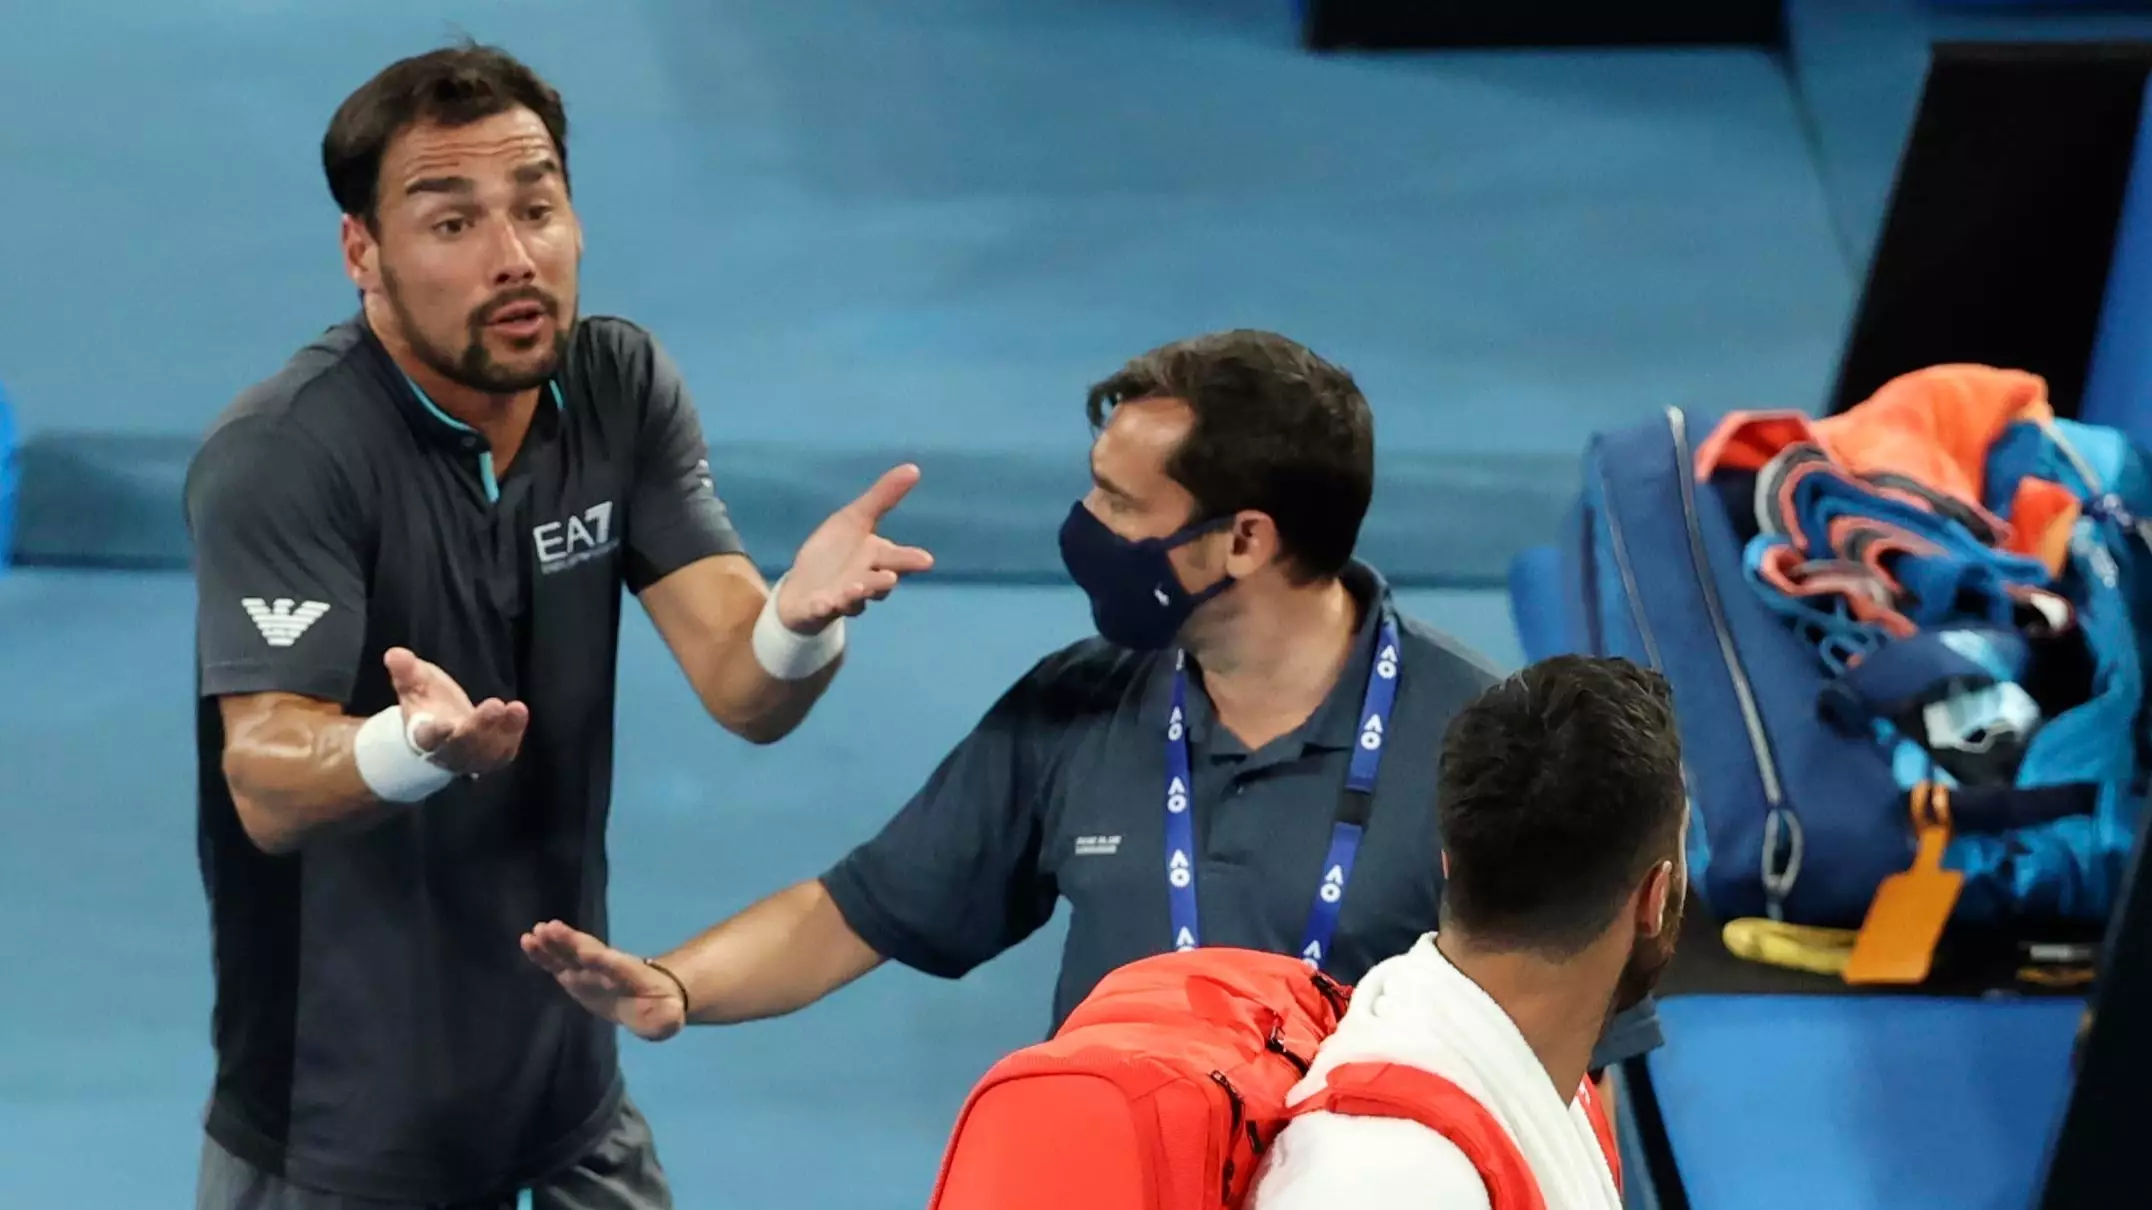 Fabio Fognini And Salvatore Caruso Had To Be Separated In Fiery Post-Match Argument 